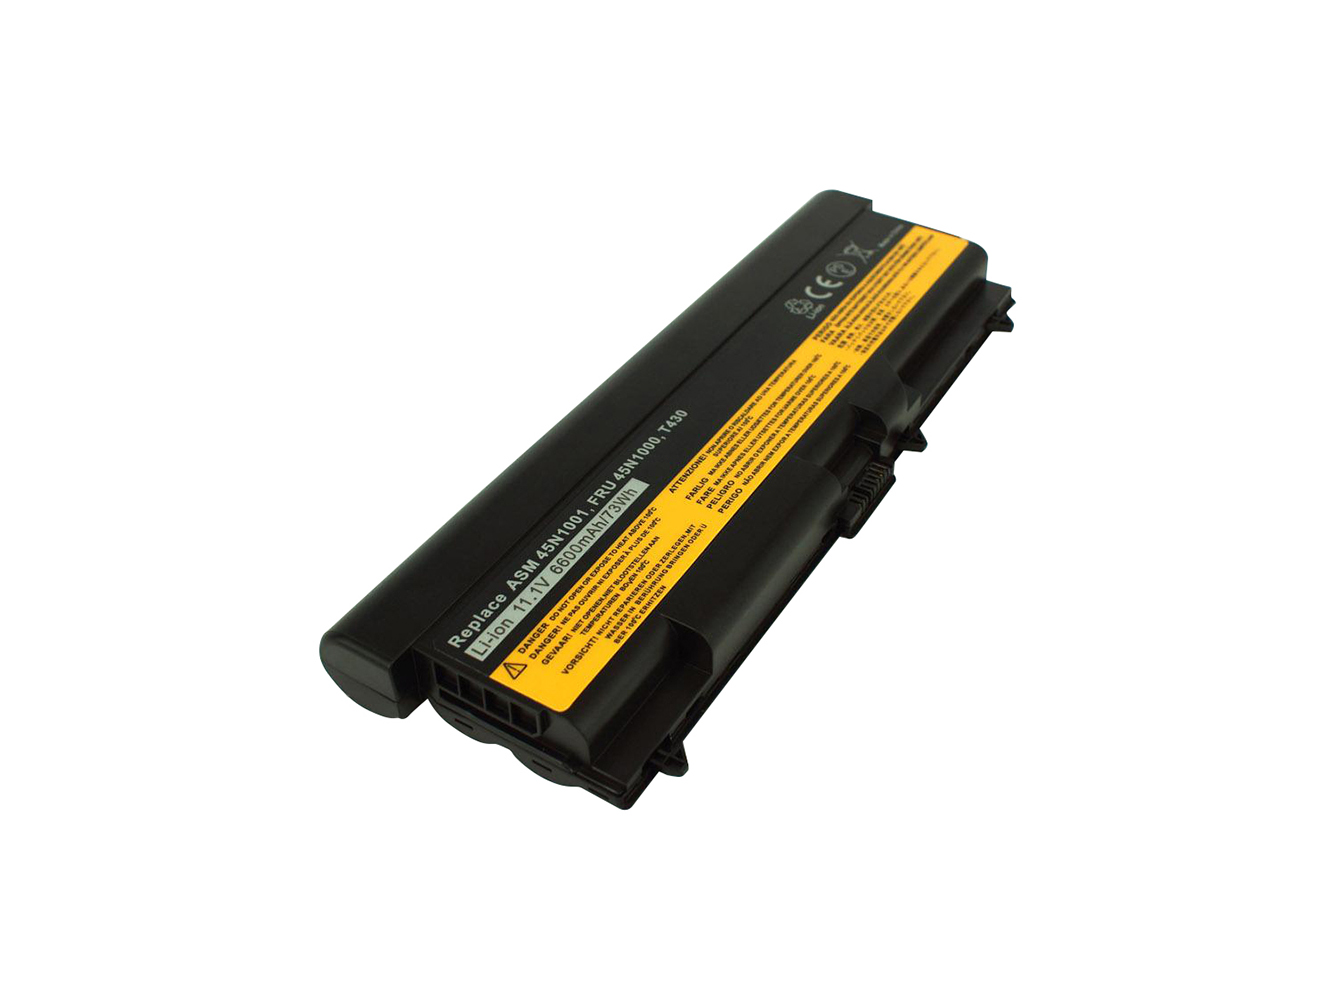 45N1007 replacement Laptop Battery for Lenovo L430, T510, 9 cells, 6600mAh, 11.10V